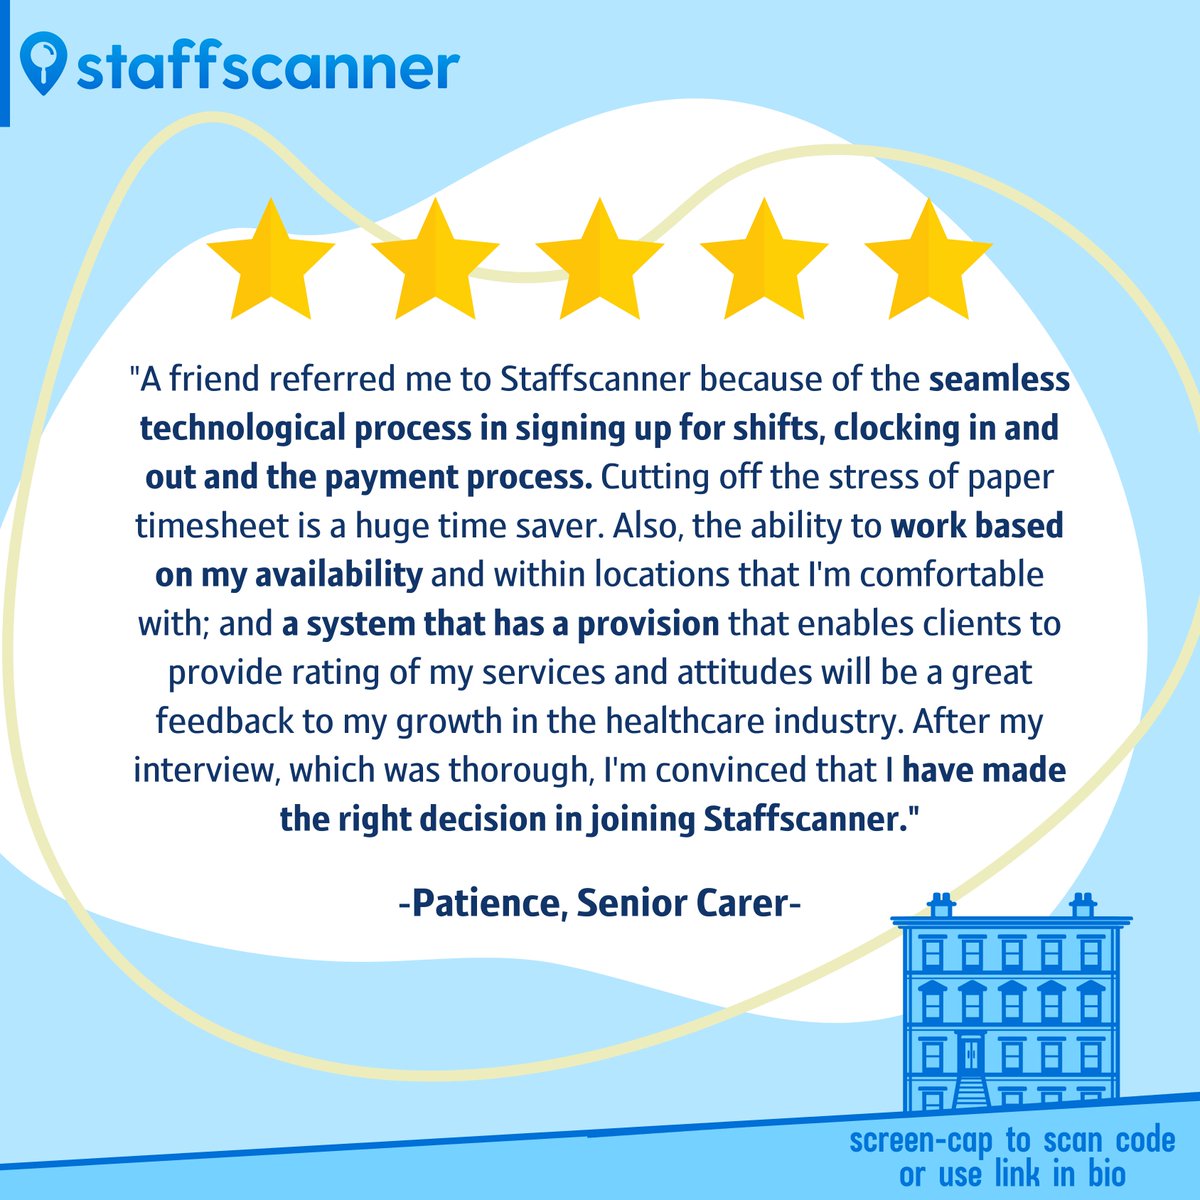 We support a range of care workers and care providers. See what Patience had to say about why they like using Staffscanner. 💙
staffscanner.co.uk
 #improvement #care #review #carersuk #healthcare #seniorcarers